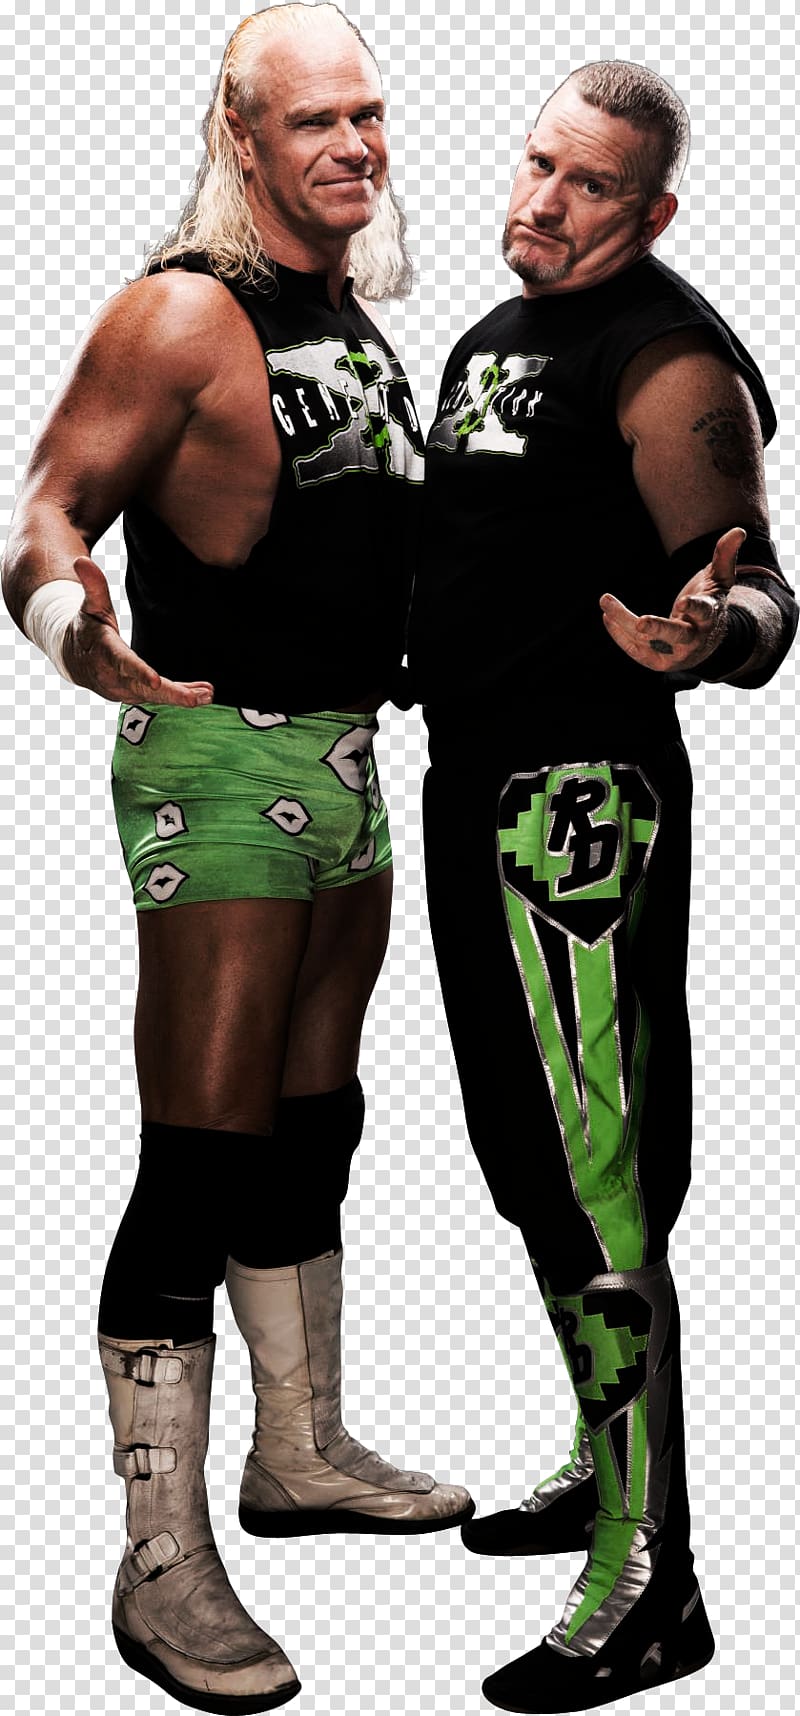 Road Dogg Billy Gunn D-Generation X Royal Rumble The New Age Outlaws, big show transparent background PNG clipart